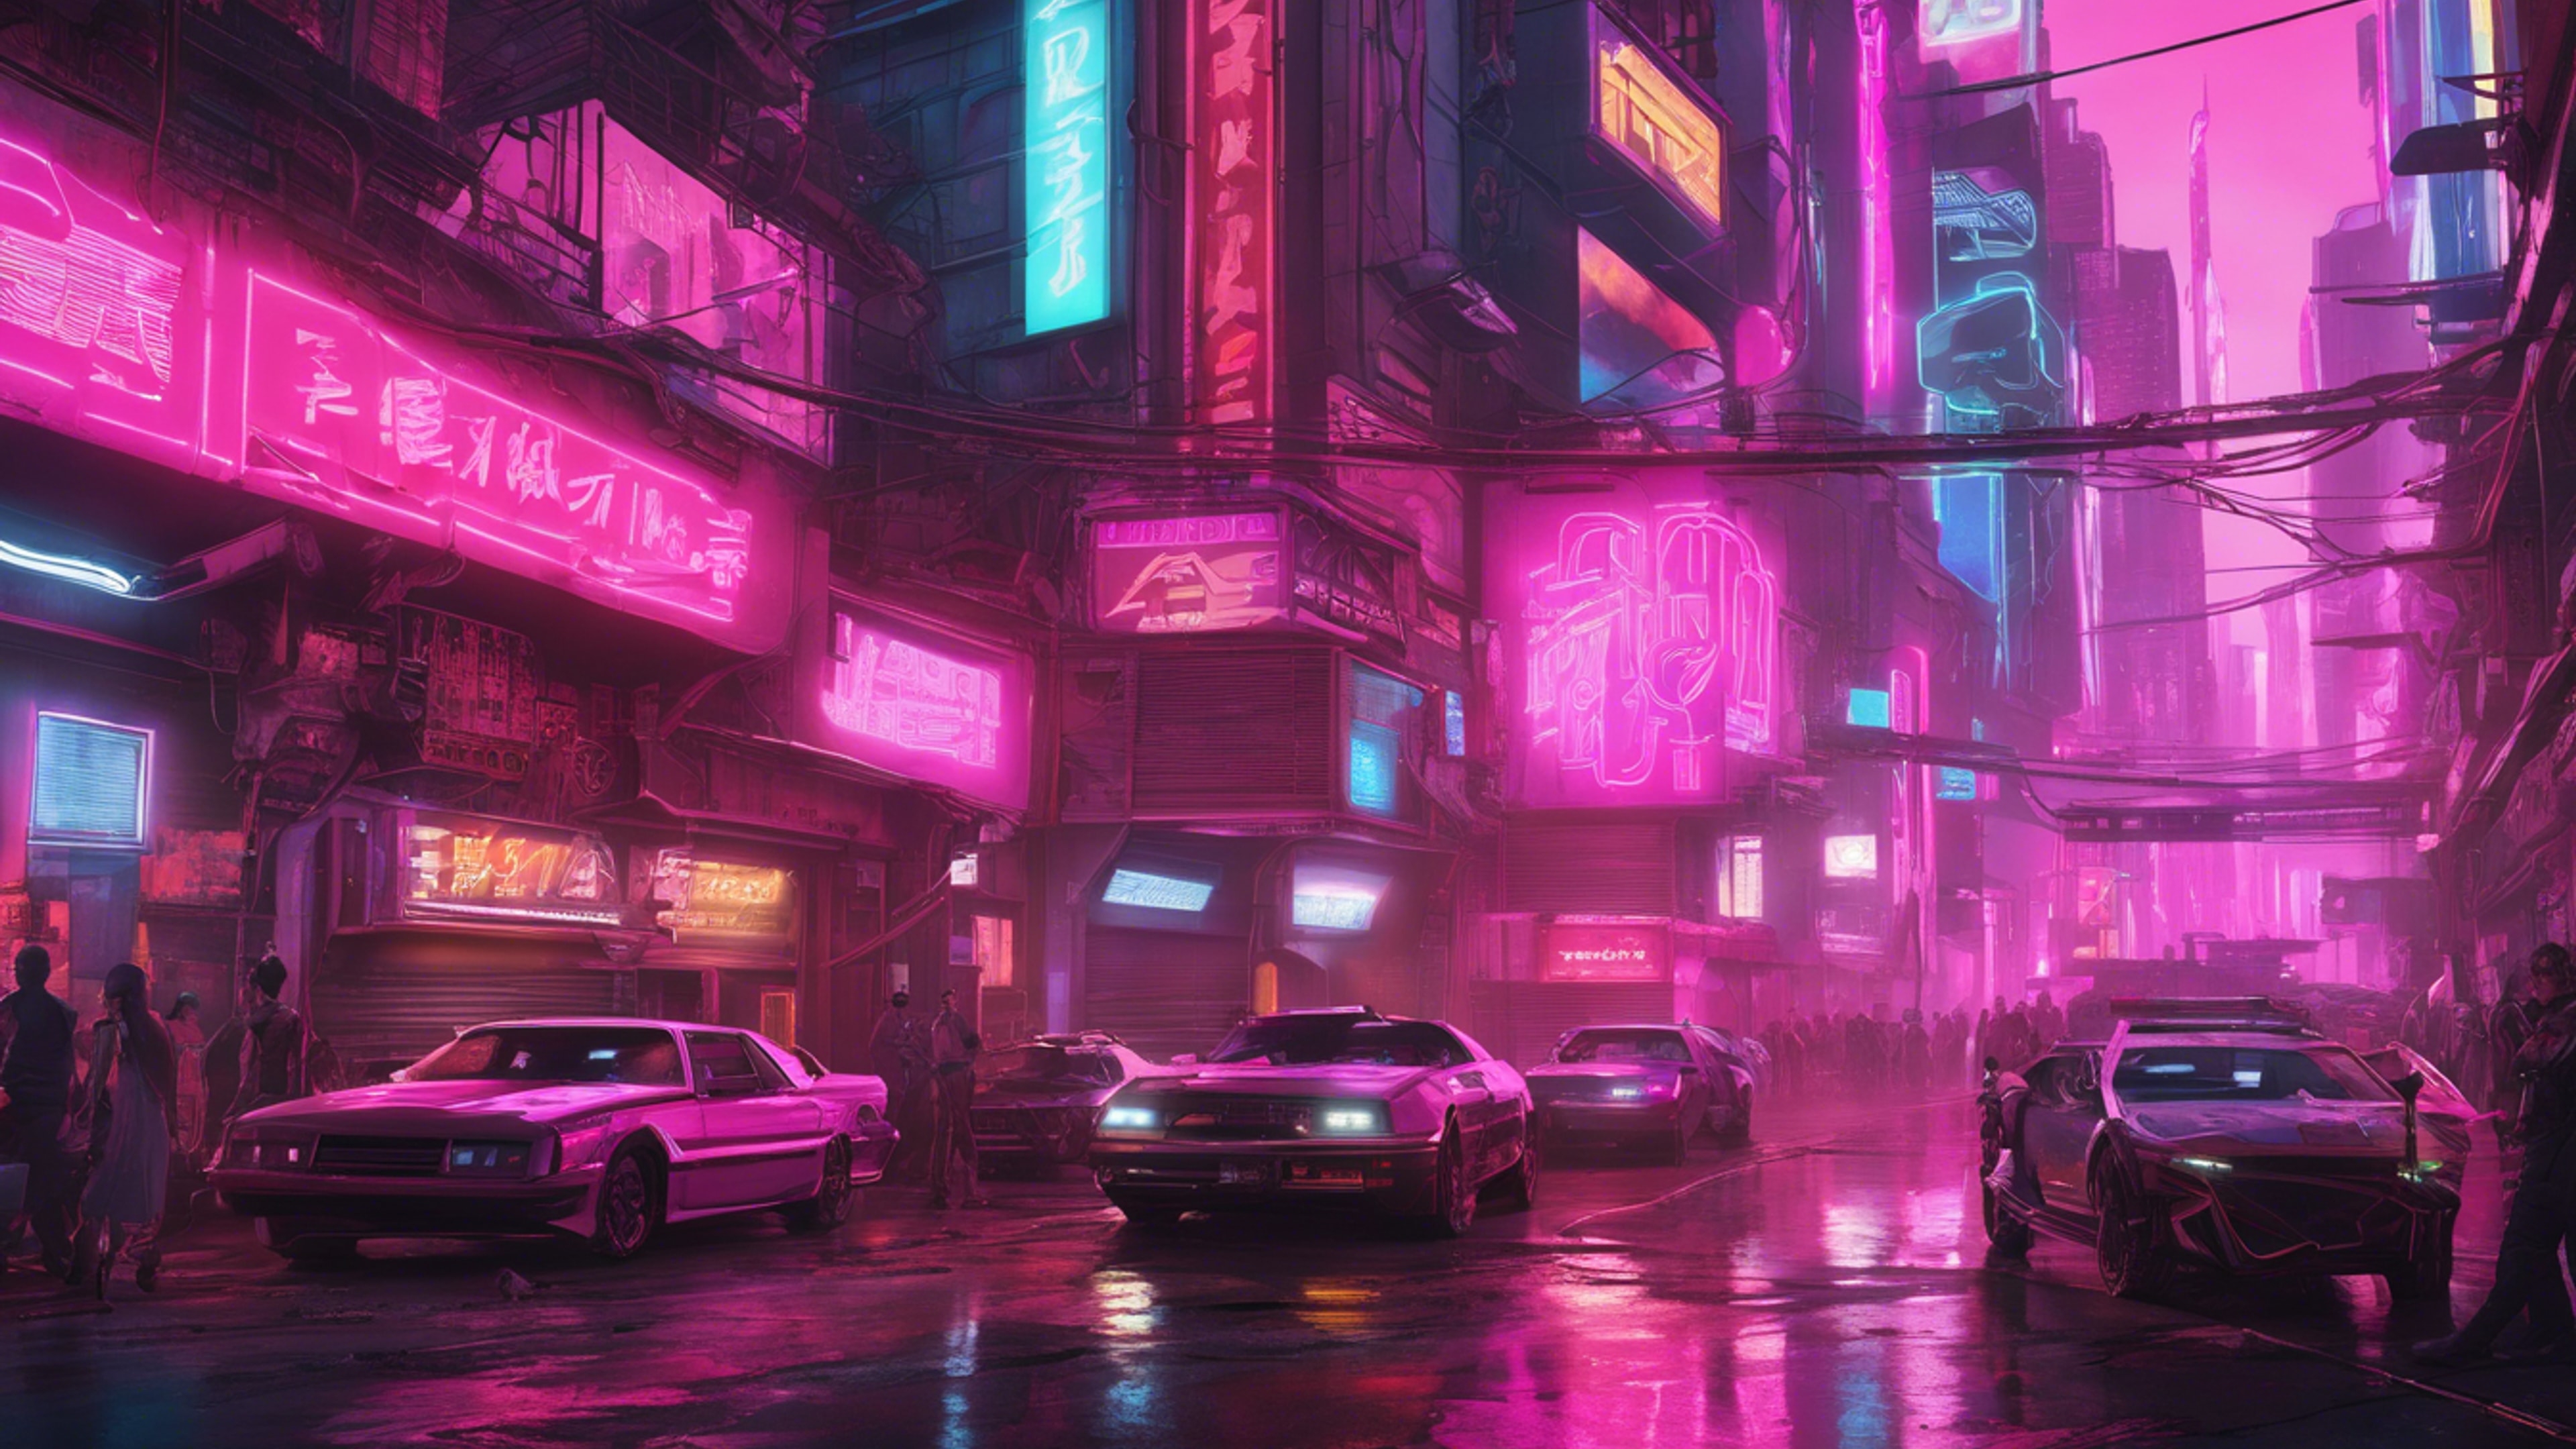 A wide-angle view of a bustling city street in the future, dominated by pink neon signs. Дэлгэцийн зураг[5759e15553a14a8aa13a]